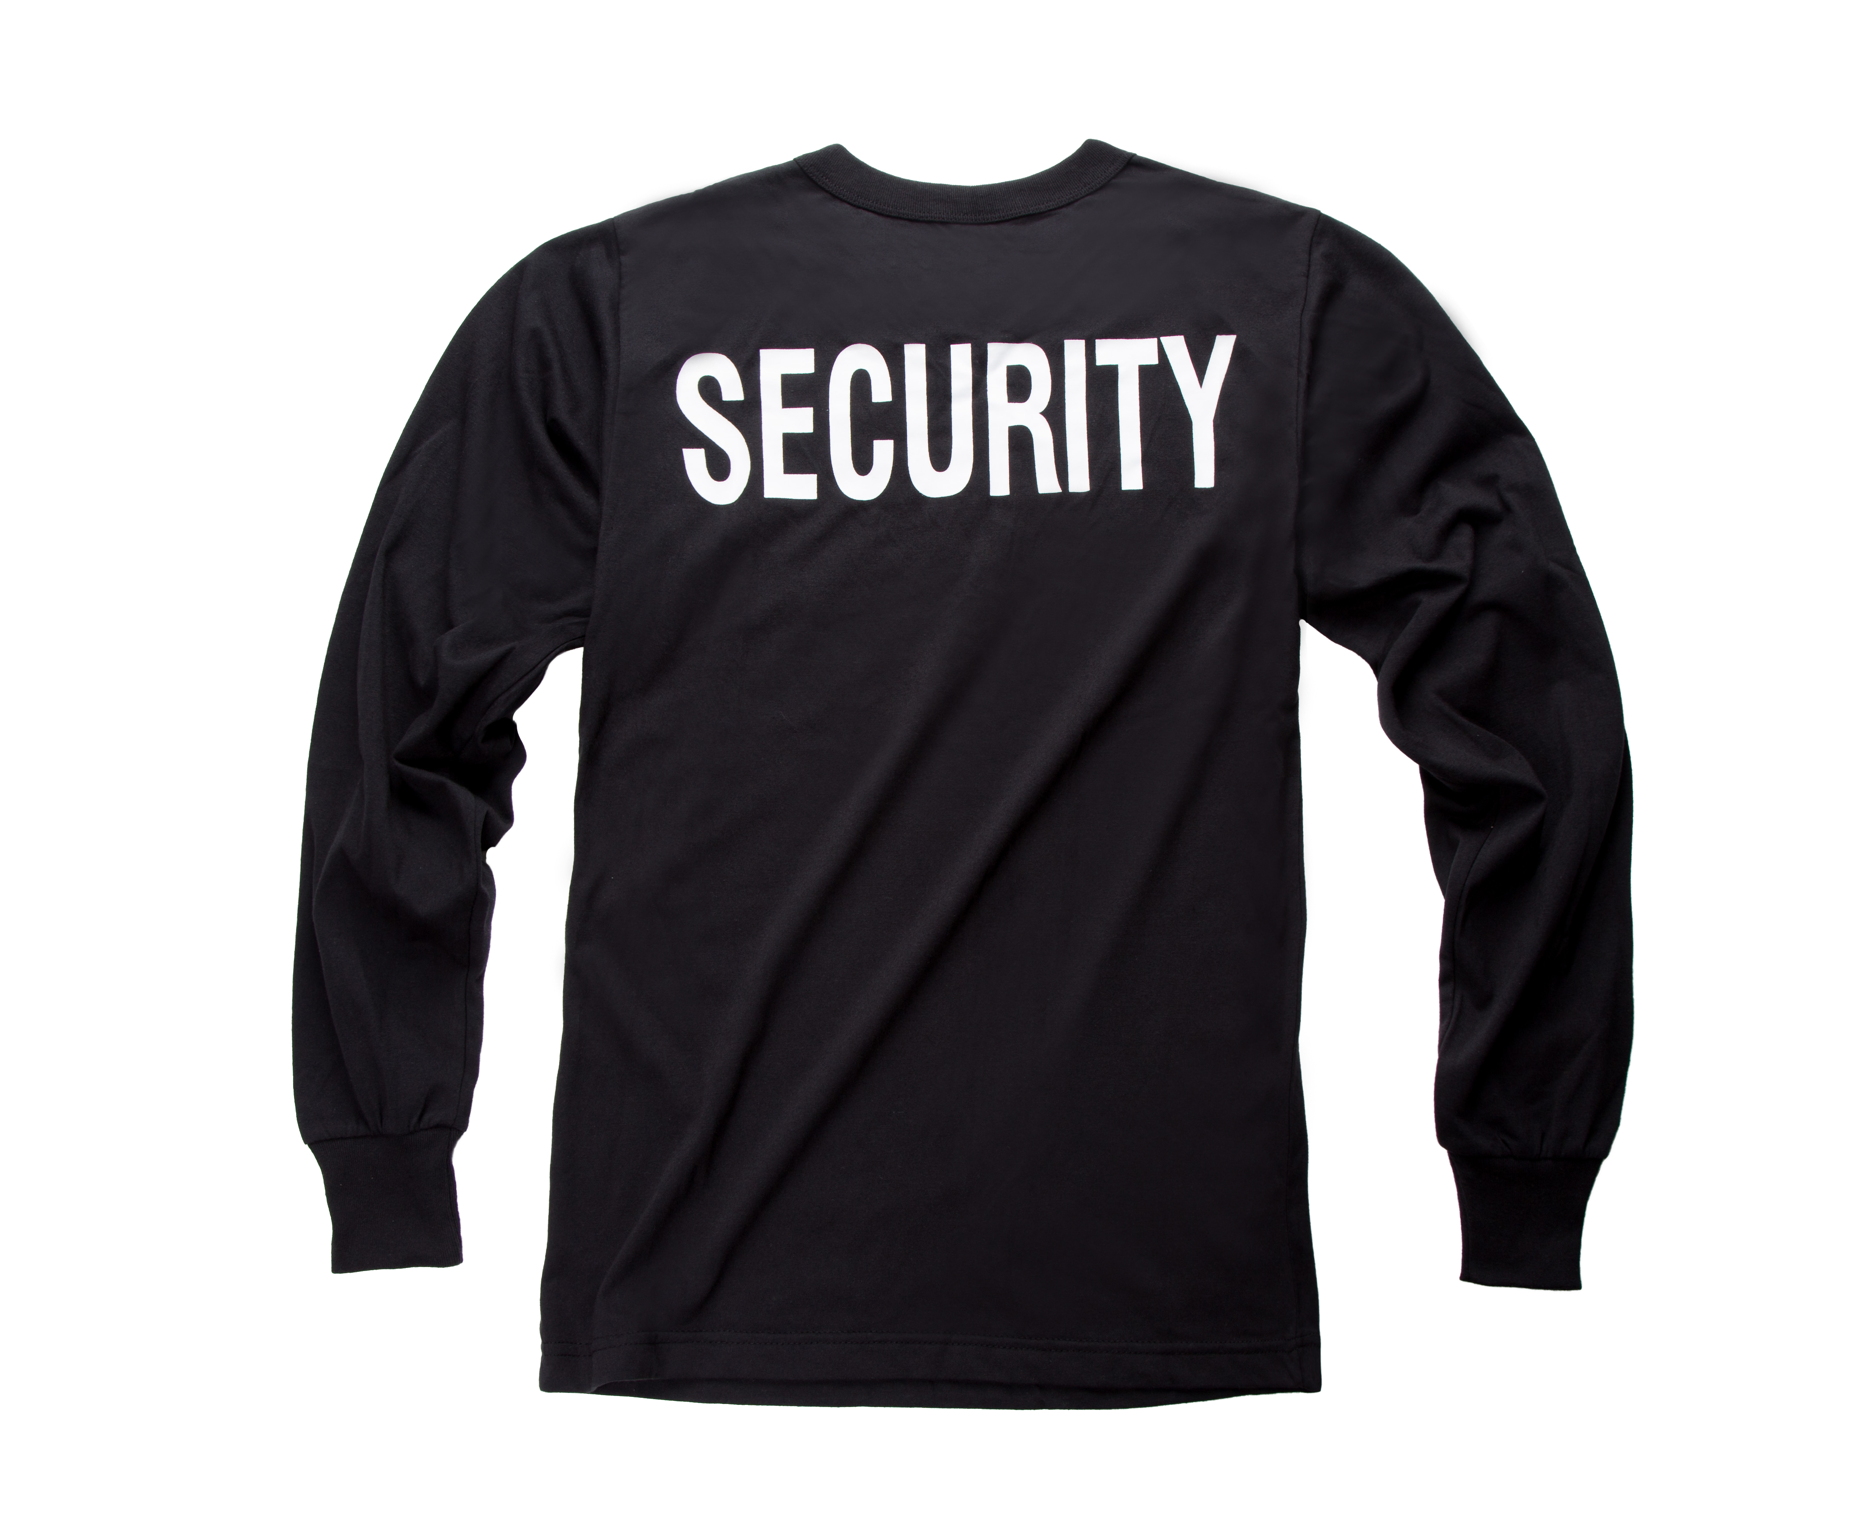 New Mens Army Style Security Uniform T-shirt Tee - Black -size S, M, L ...